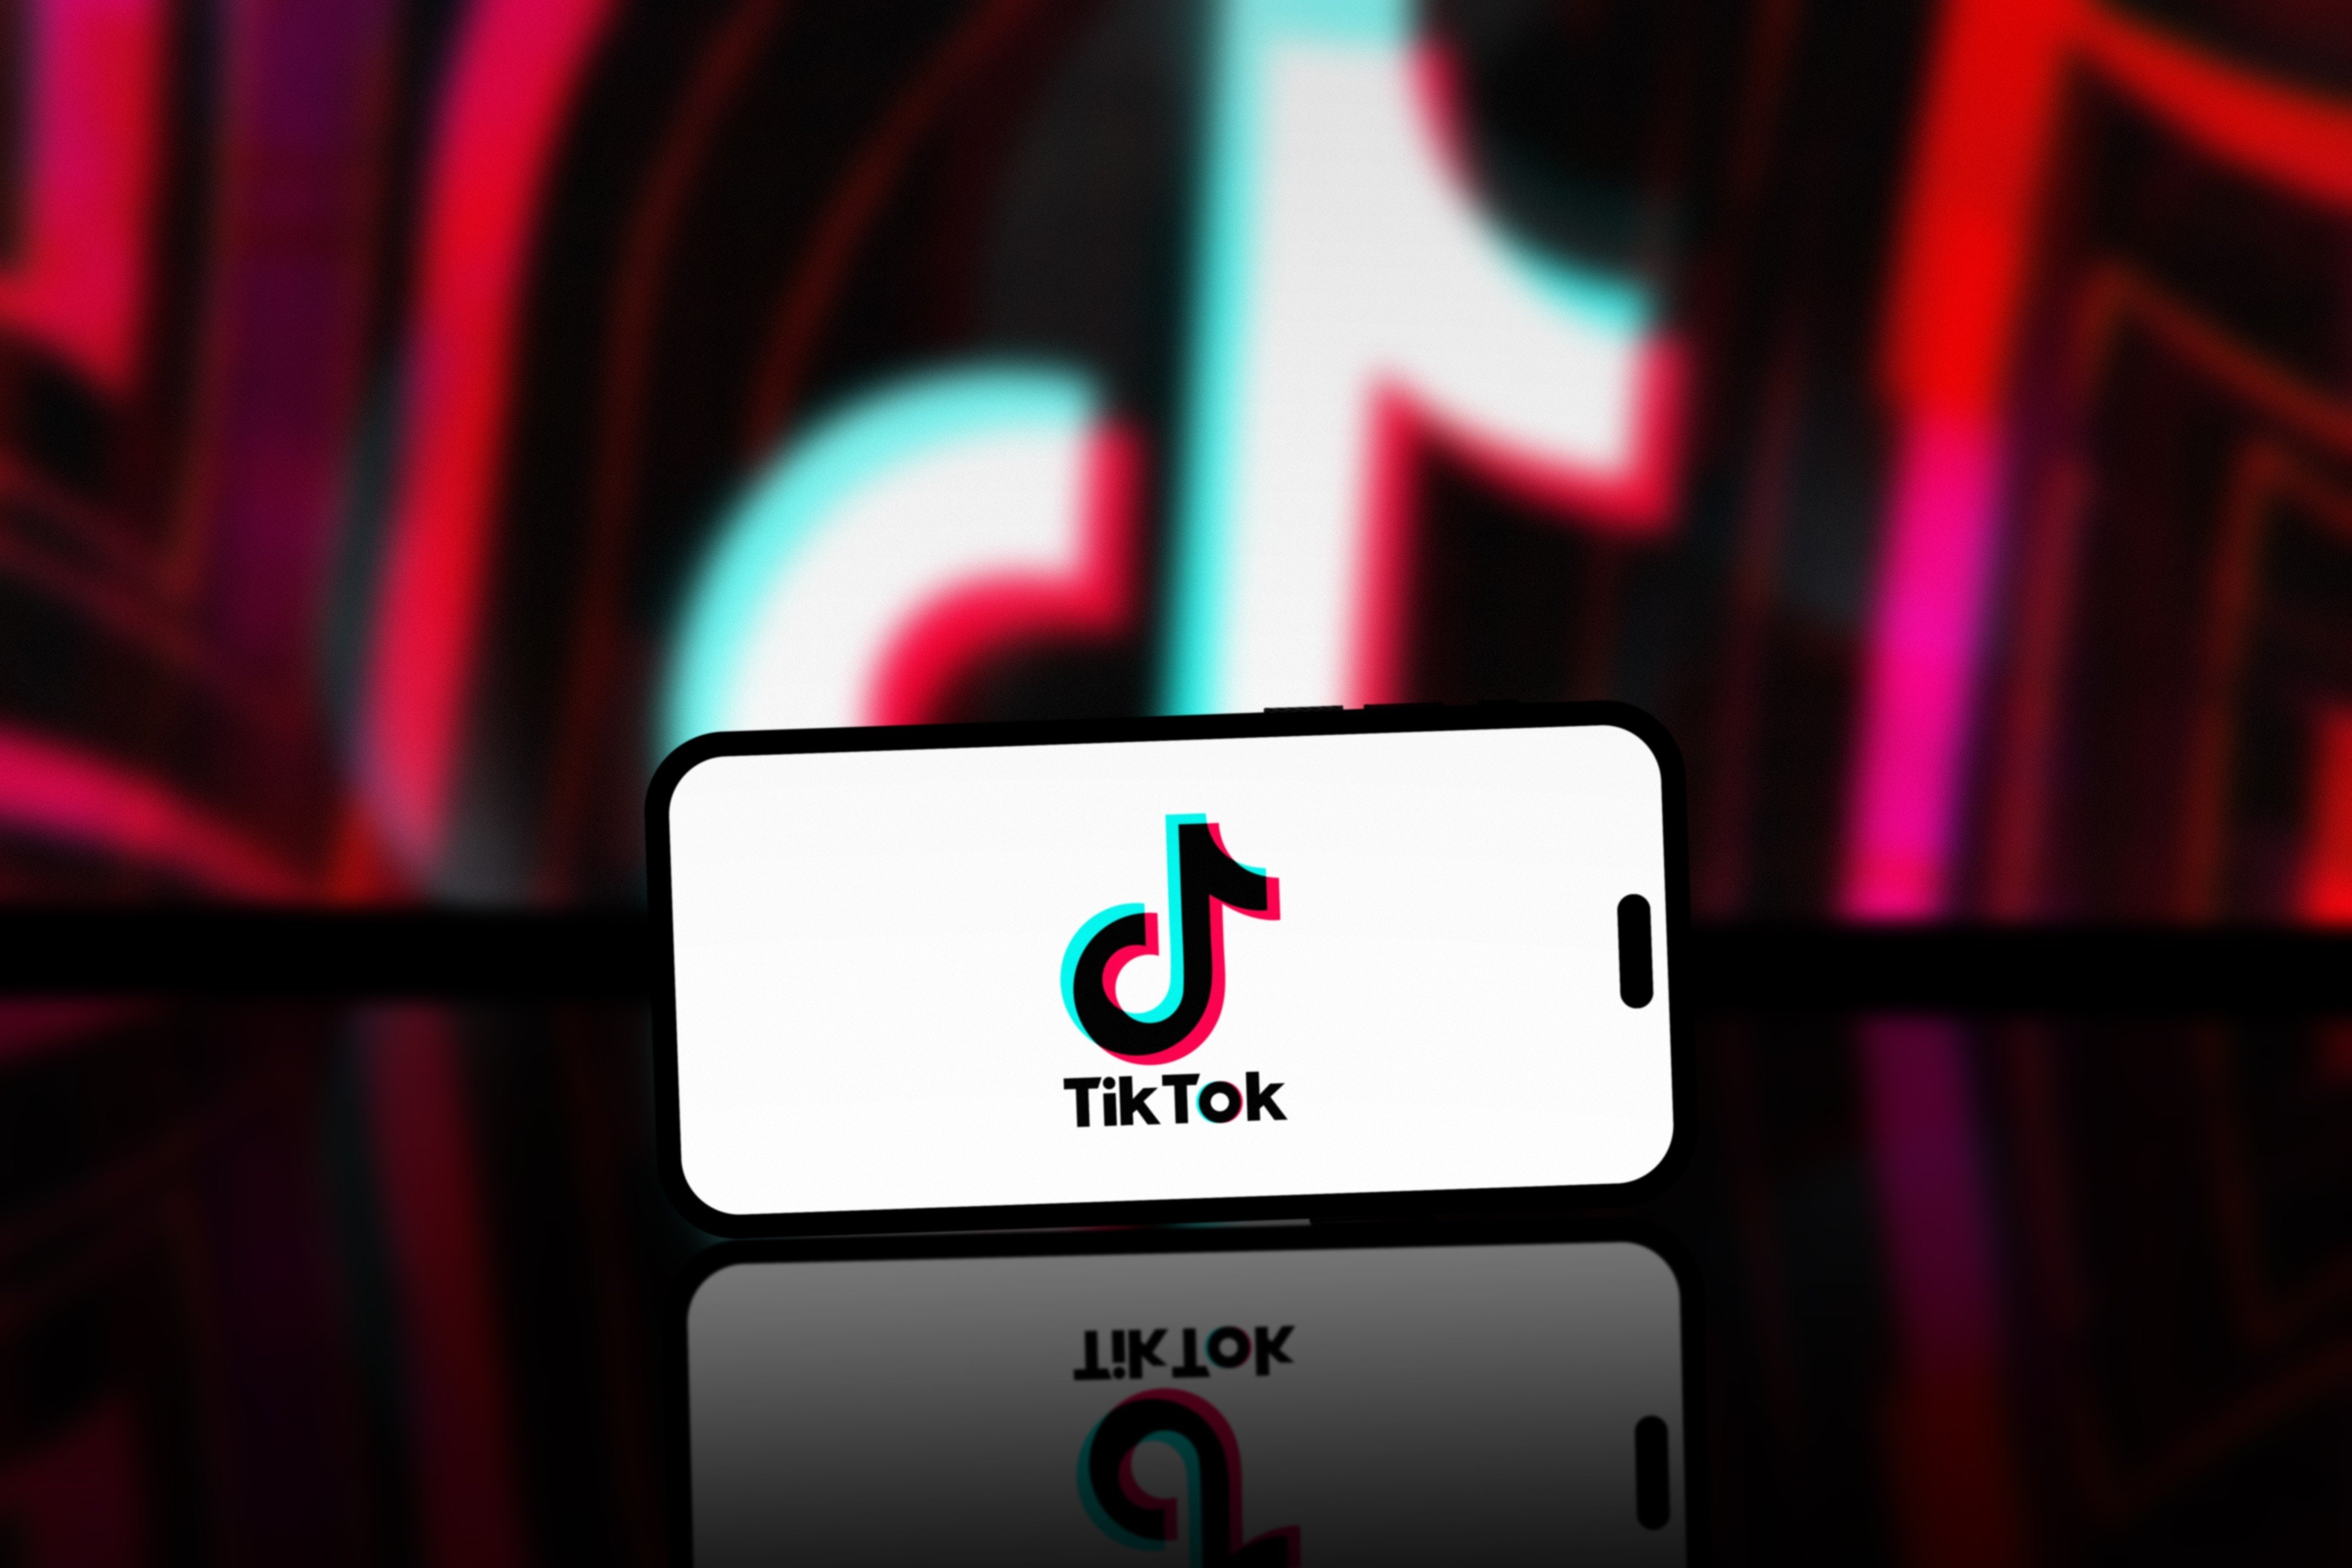 TikTok said its local services operations in Thailand and Indonesia are still in the testing stage. Photo: Shutterstock